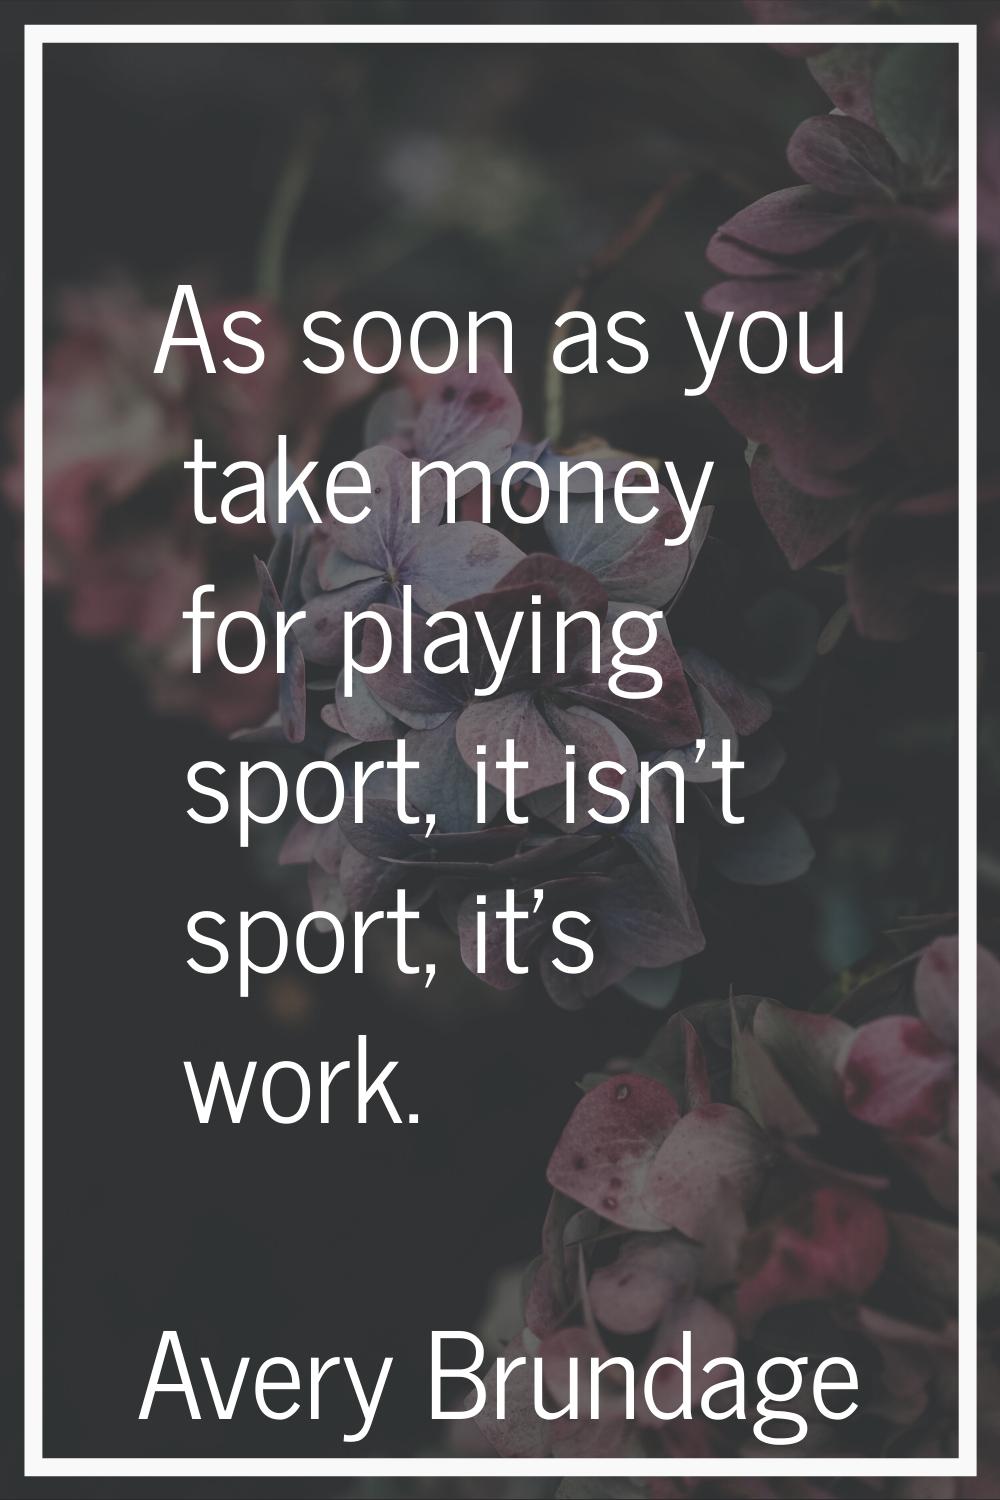 As soon as you take money for playing sport, it isn't sport, it's work.